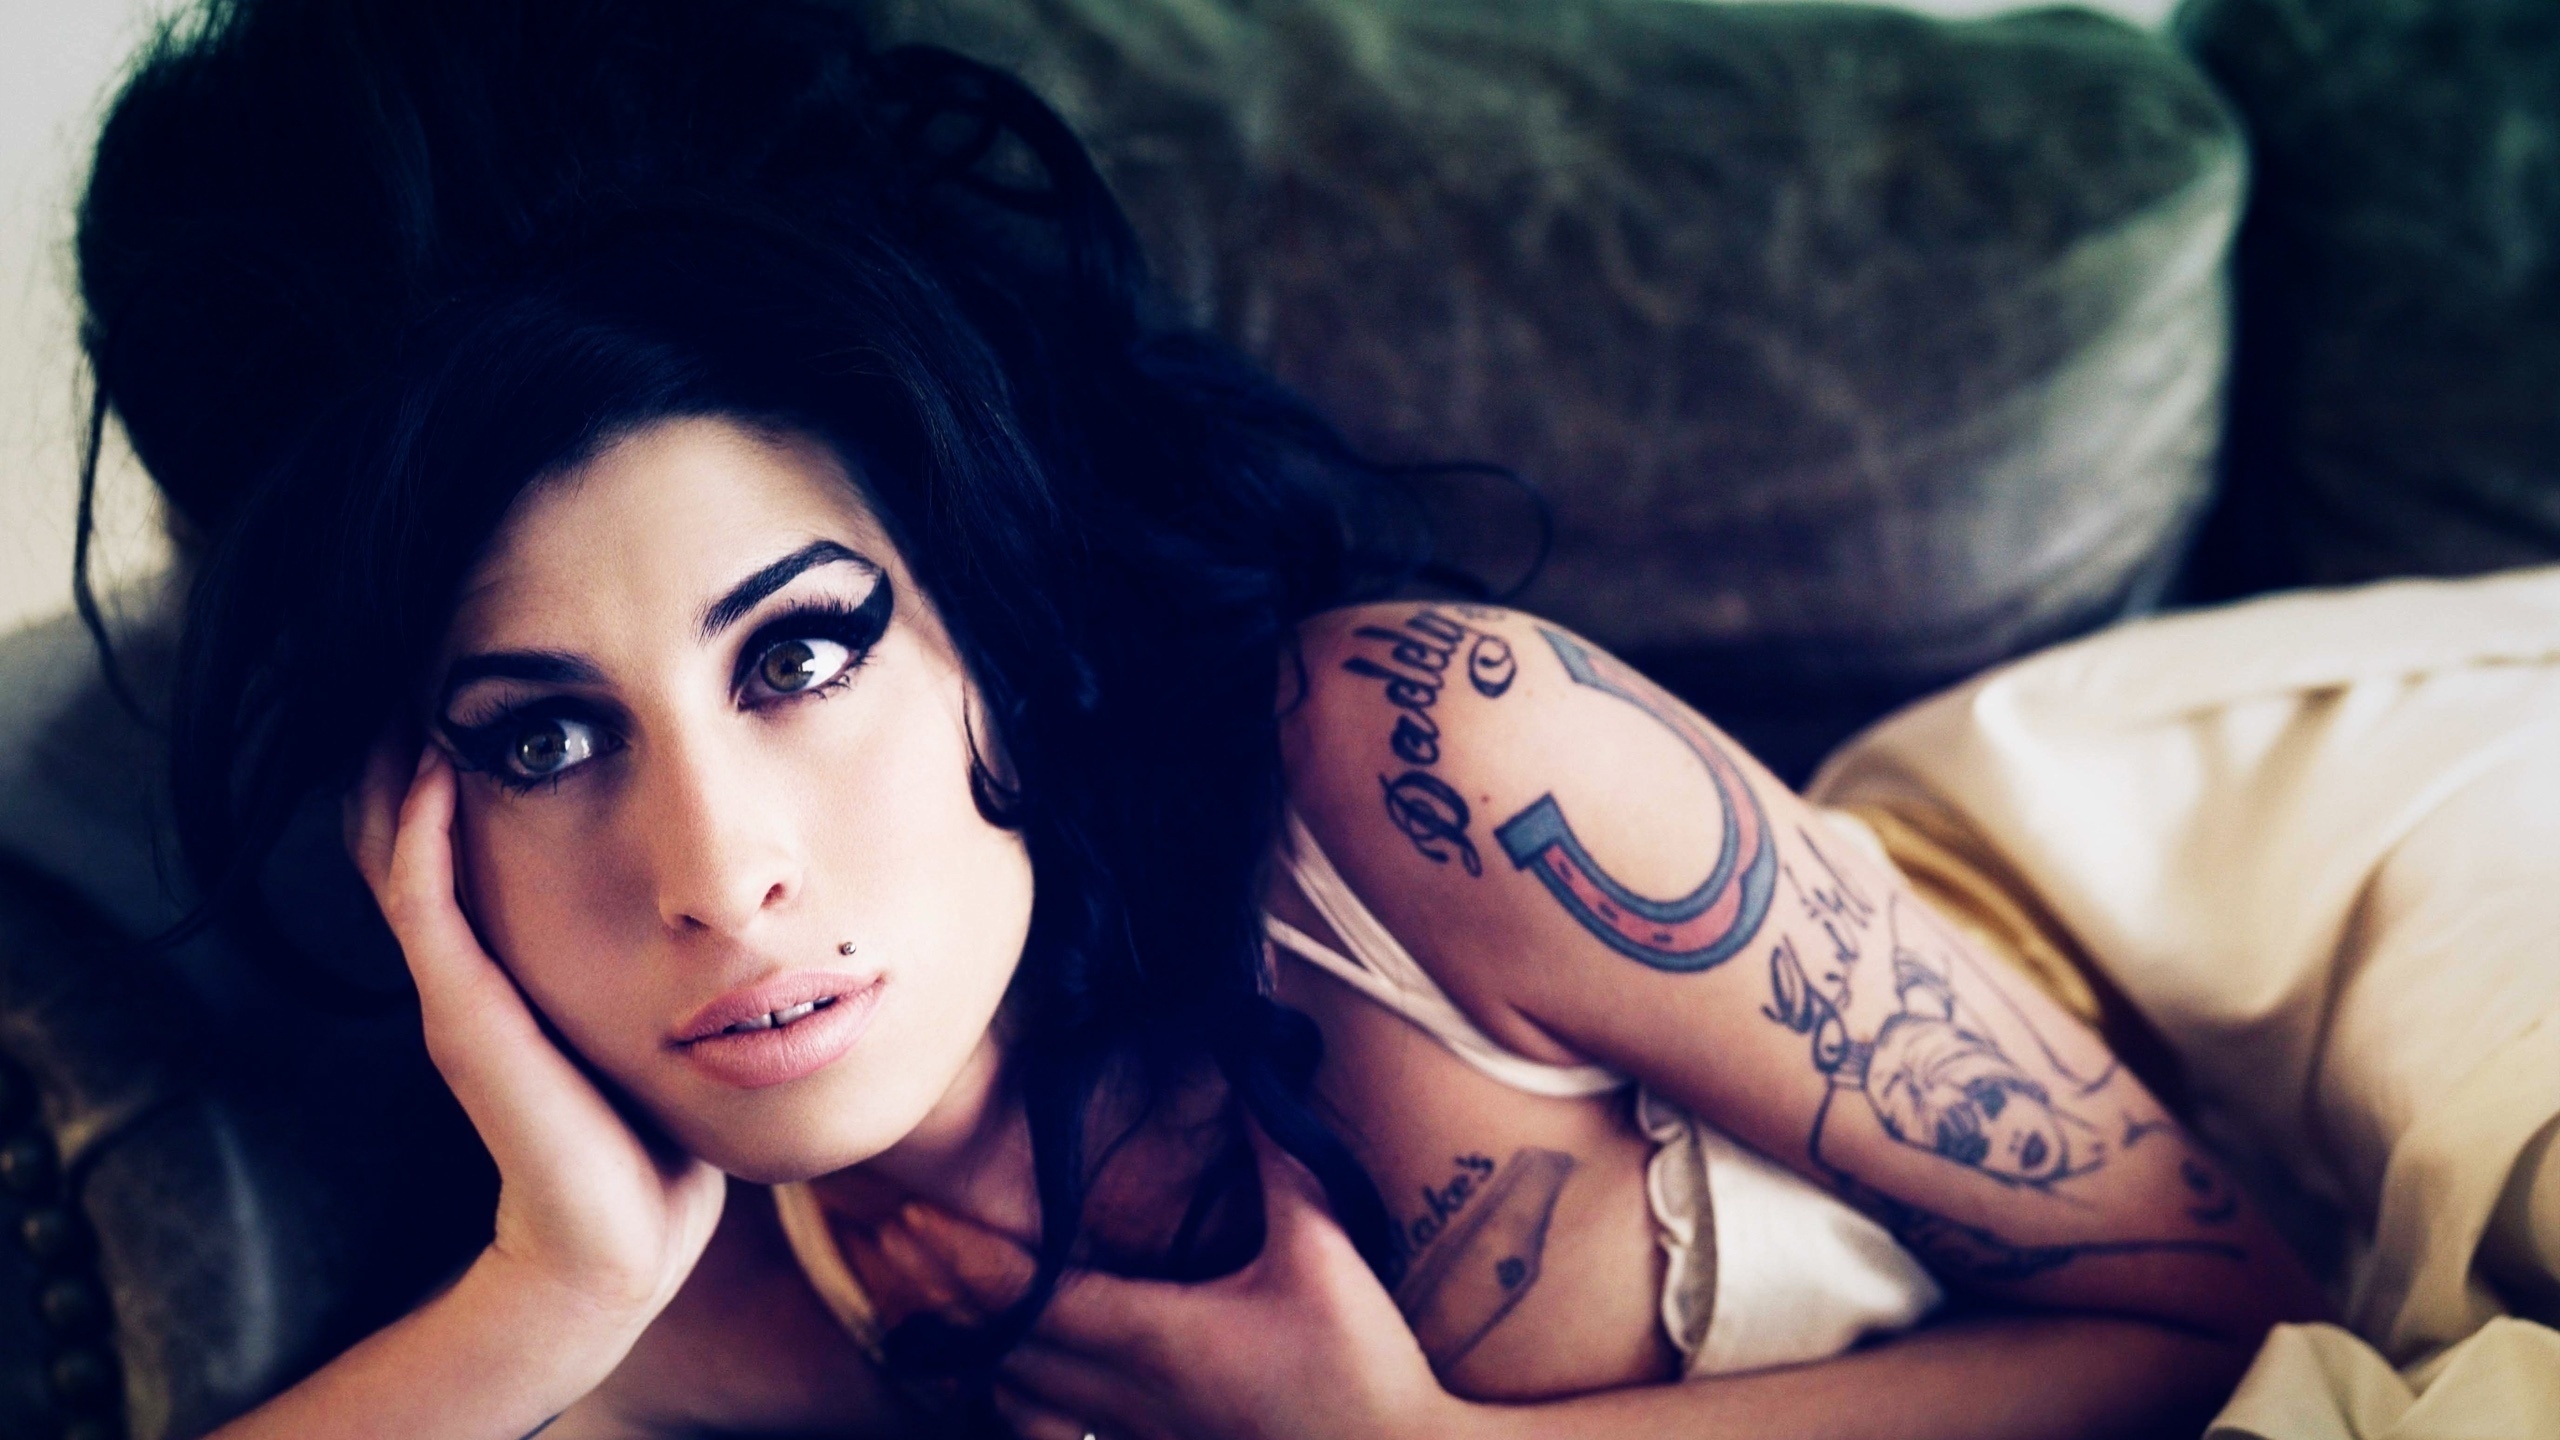 Beautiful Amy Winehouse for 2560x1440 HDTV resolution